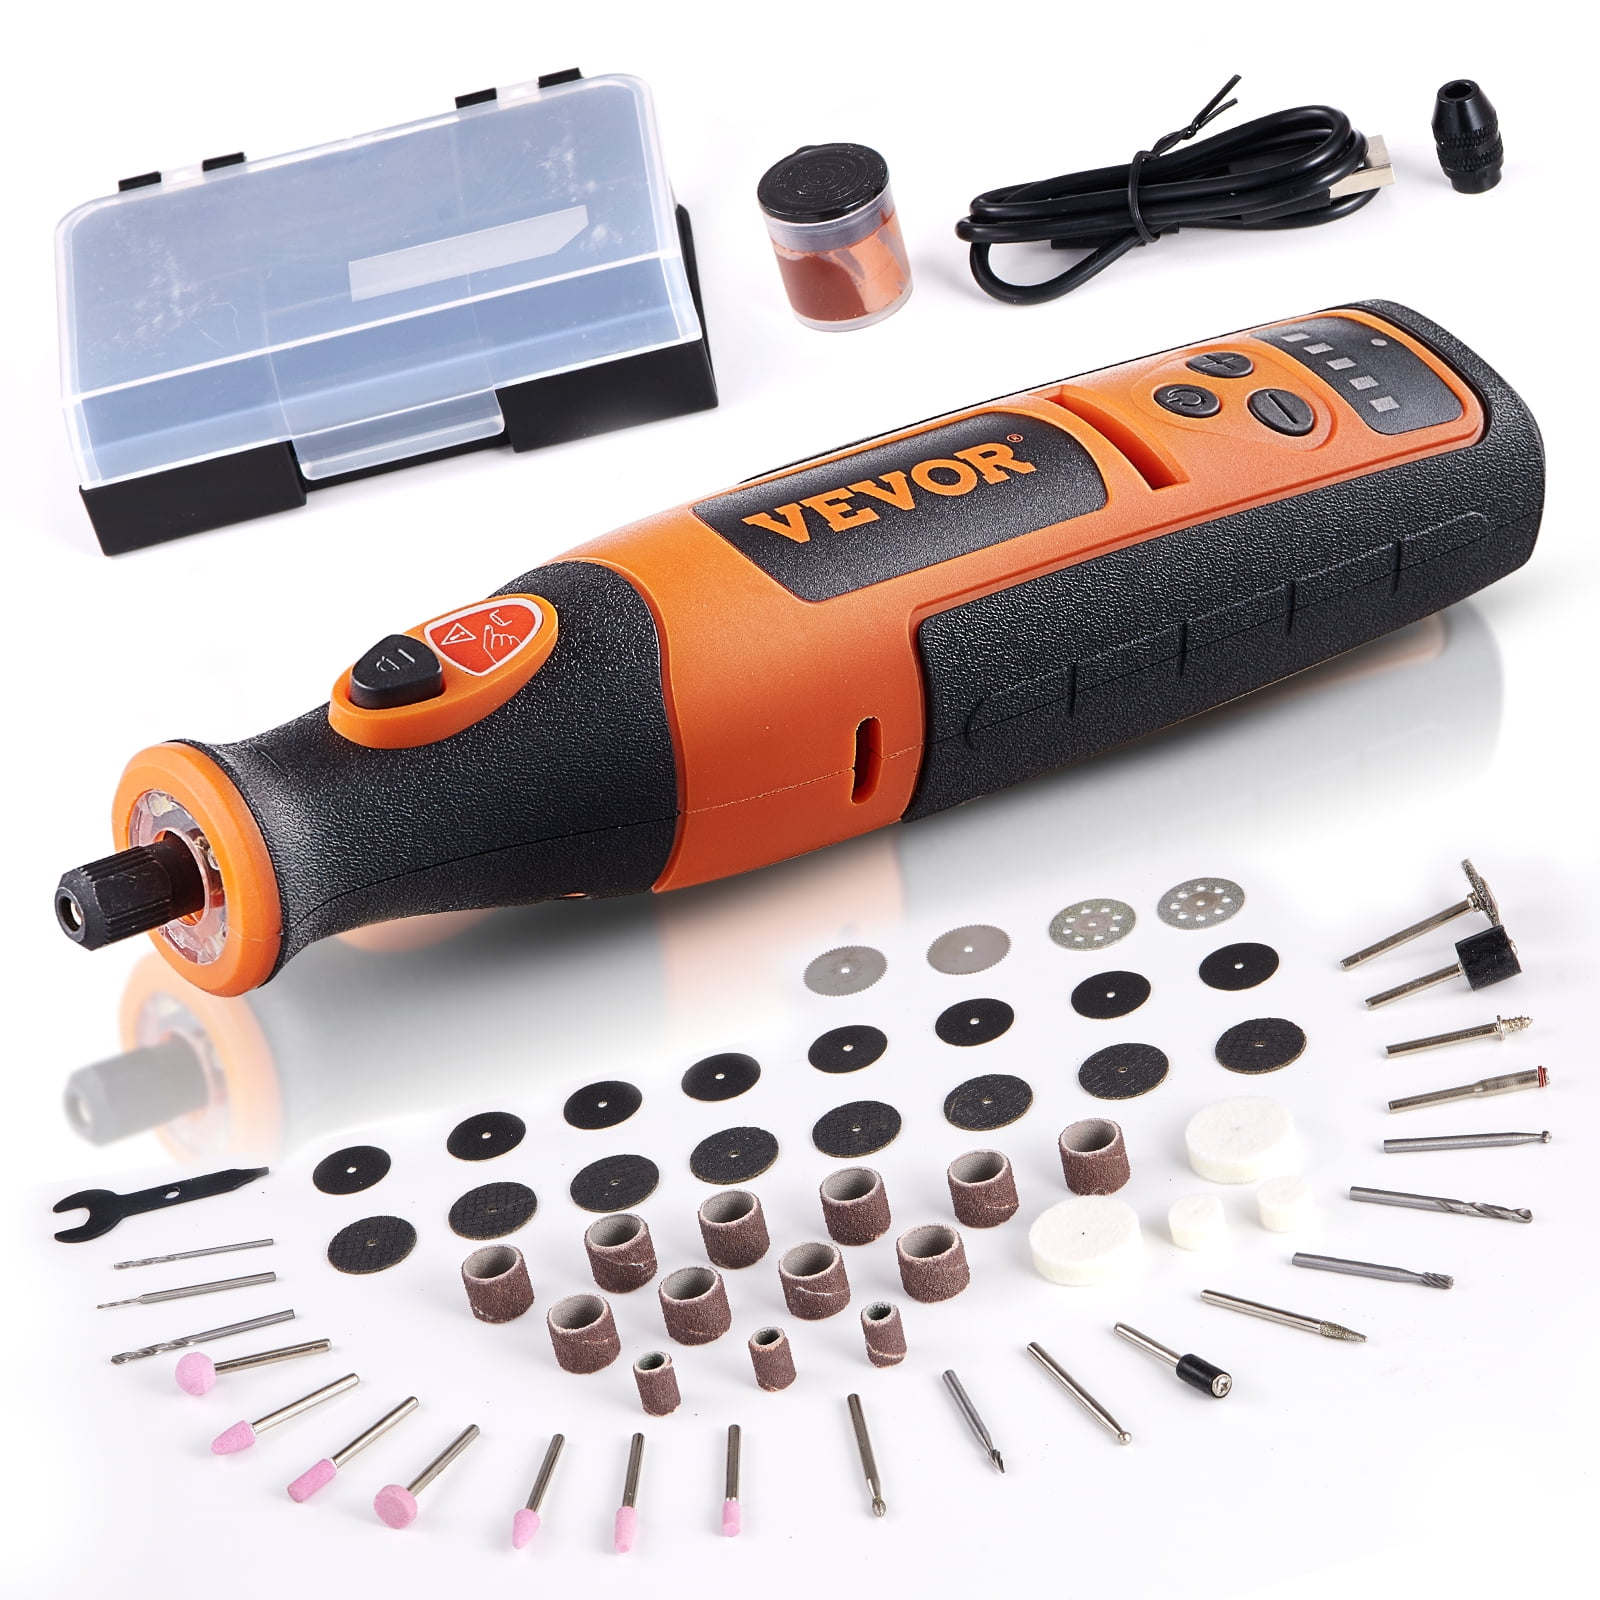 217 Pcs Rotary Tool Accessories Set for Sanding and Cutting - Multi 217 Pcs